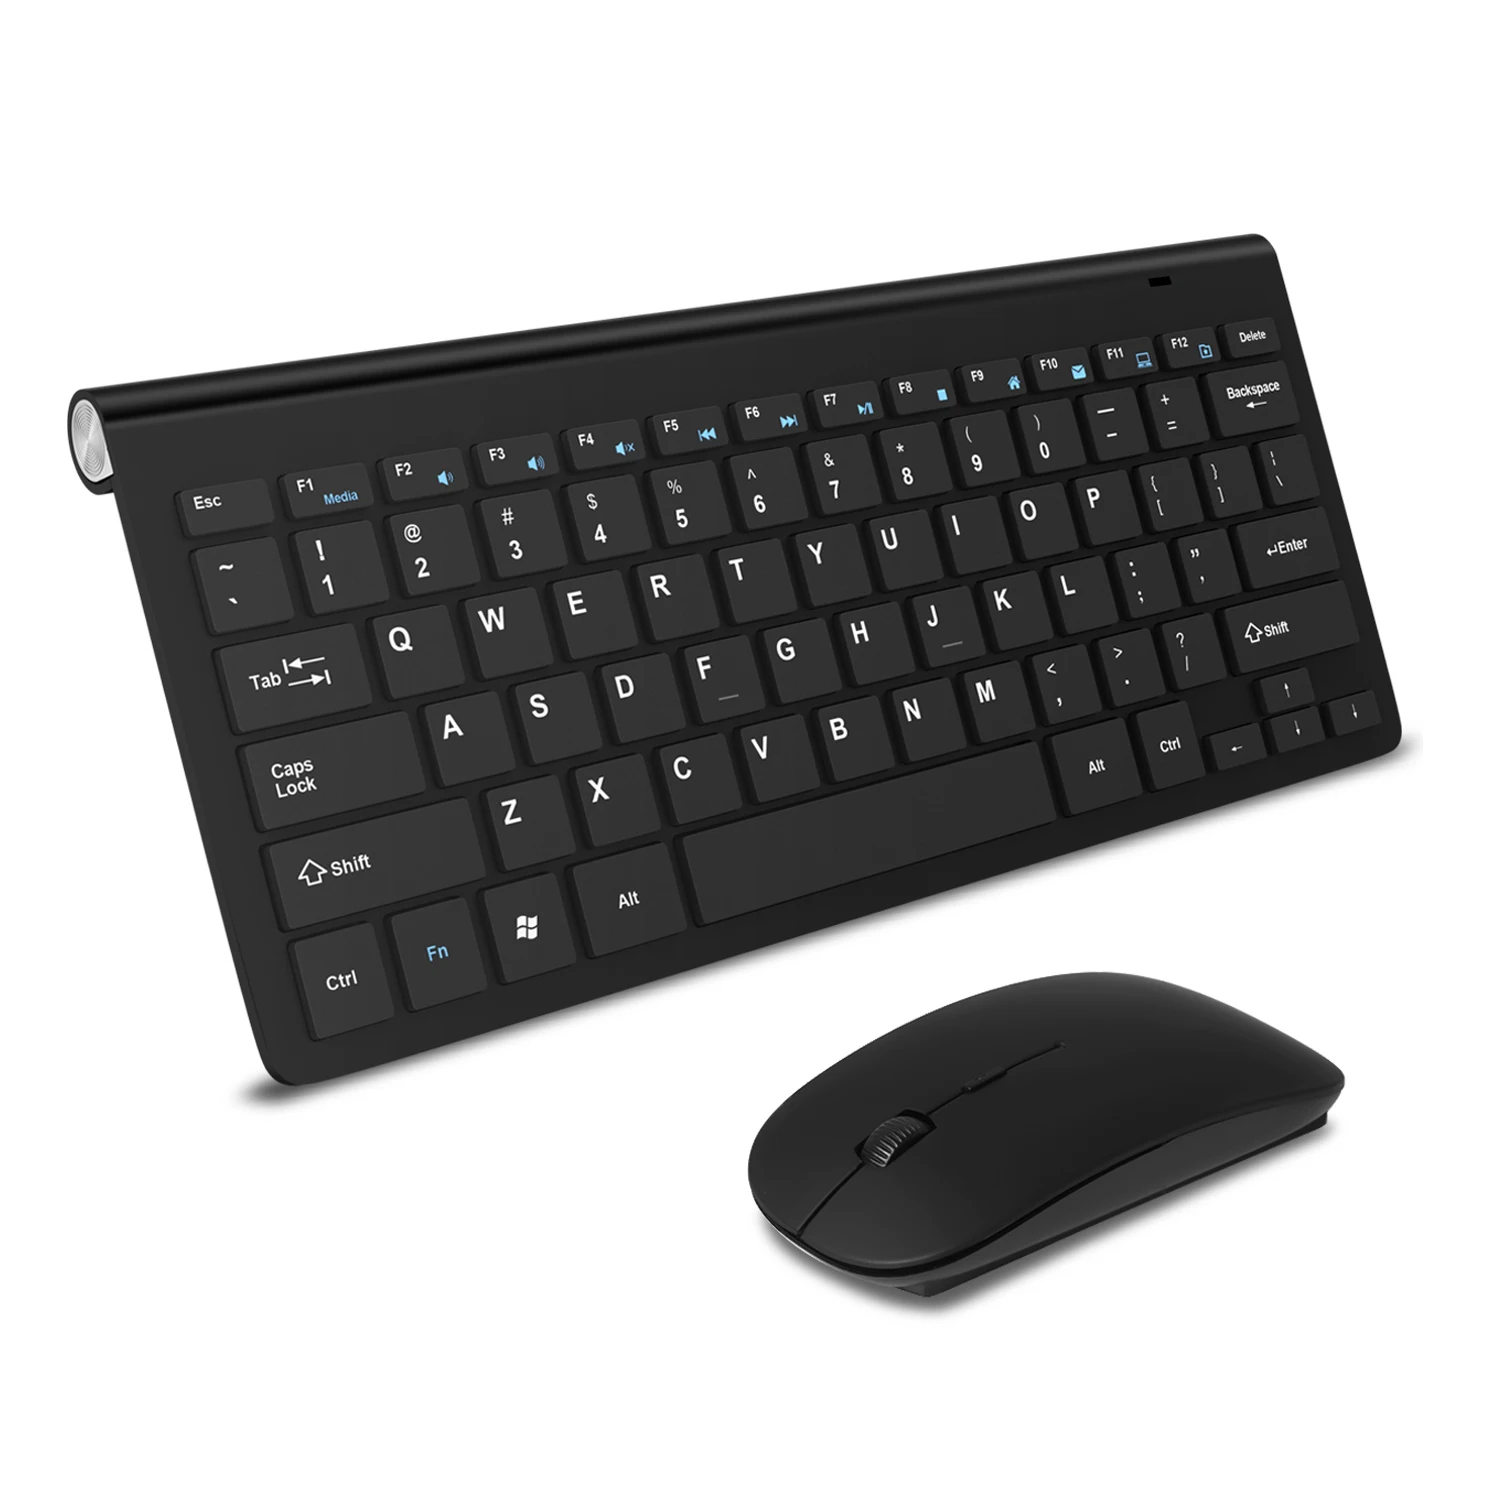 Wireless Keyboard and Mouse 2.4G USB Mini keyboard Mouse Combos